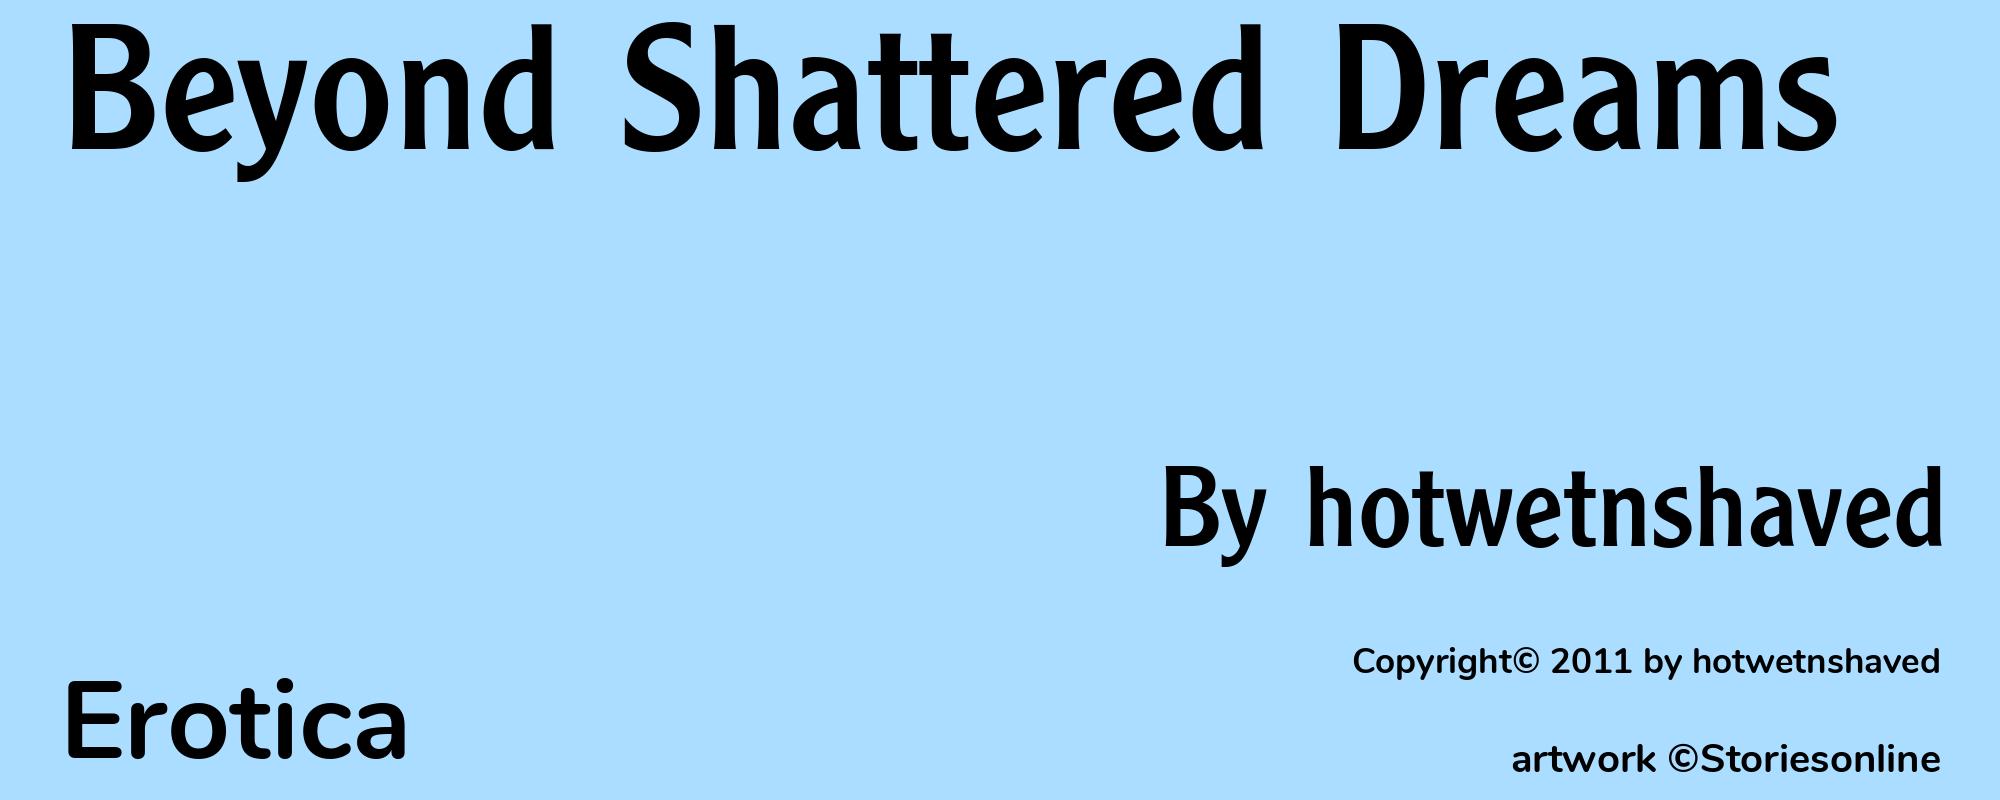 Beyond Shattered Dreams - Cover